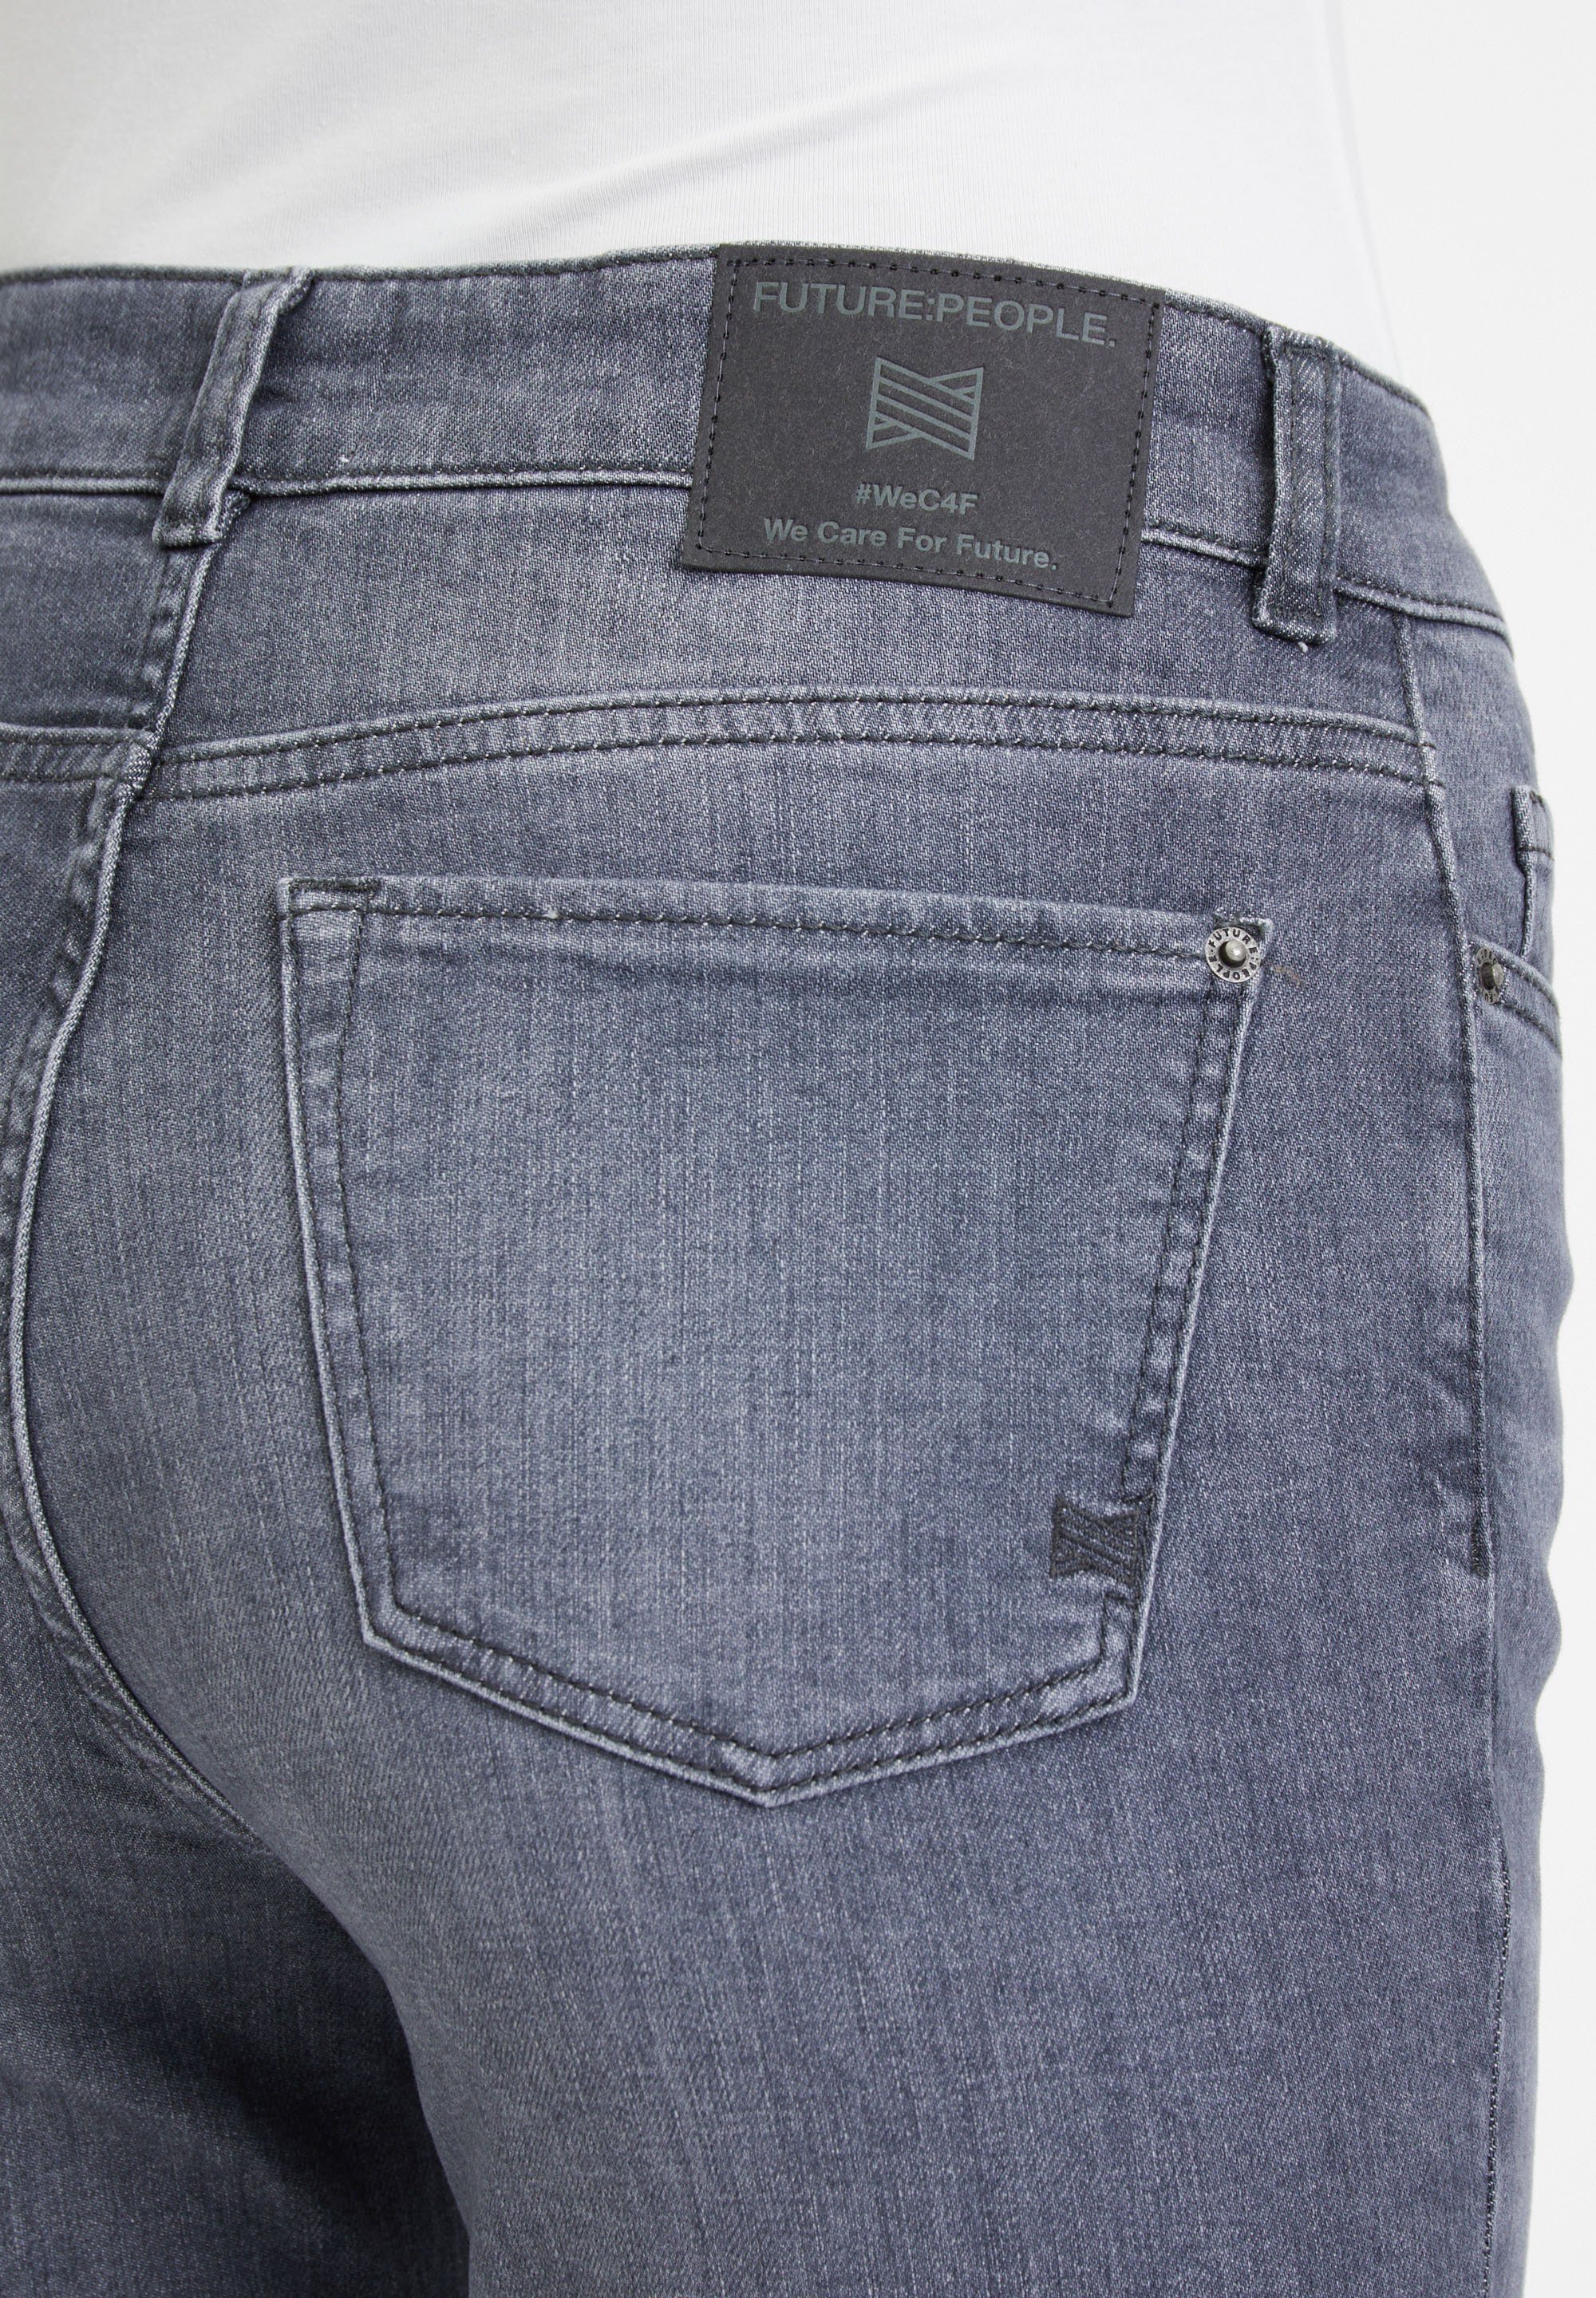 WAIST #WeC4F BOOTCUT MID We - Future. Care for 01:02 AUTHENTIC USED GREY - FUTURE:PEOPLE. Slim-fit-Jeans